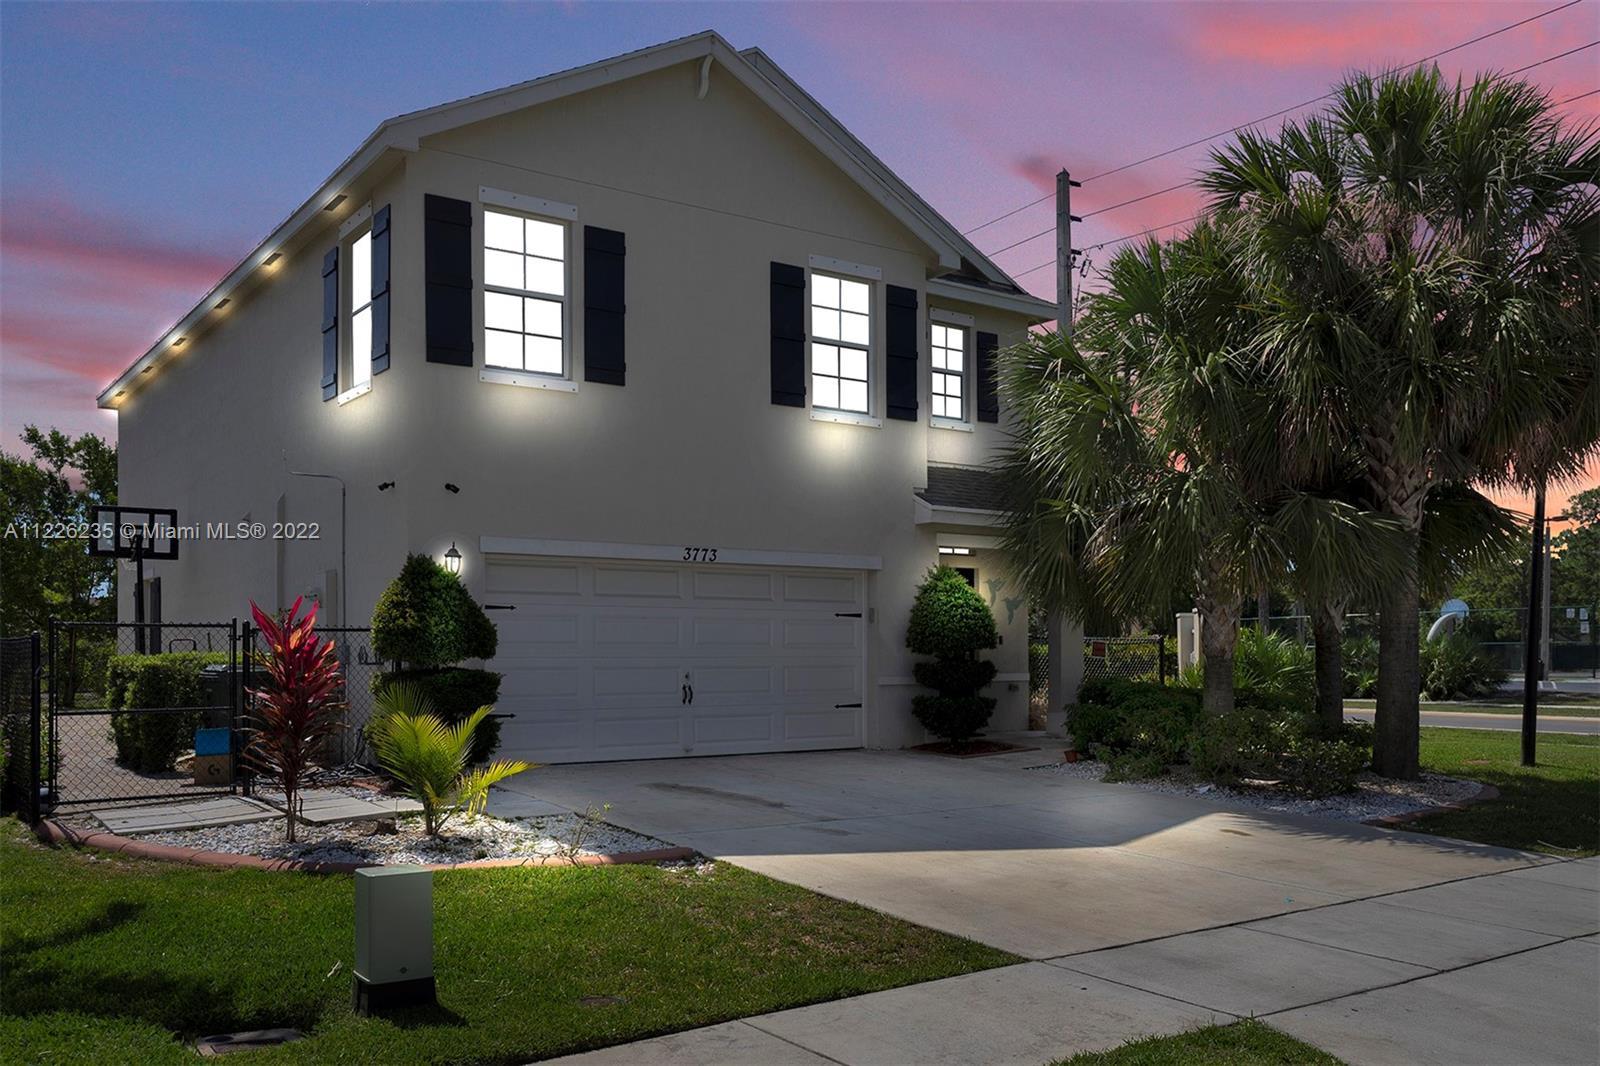 STUNNING 2-story home in the 24 home community of Whitney Park, located in the heart of Greenacres. 